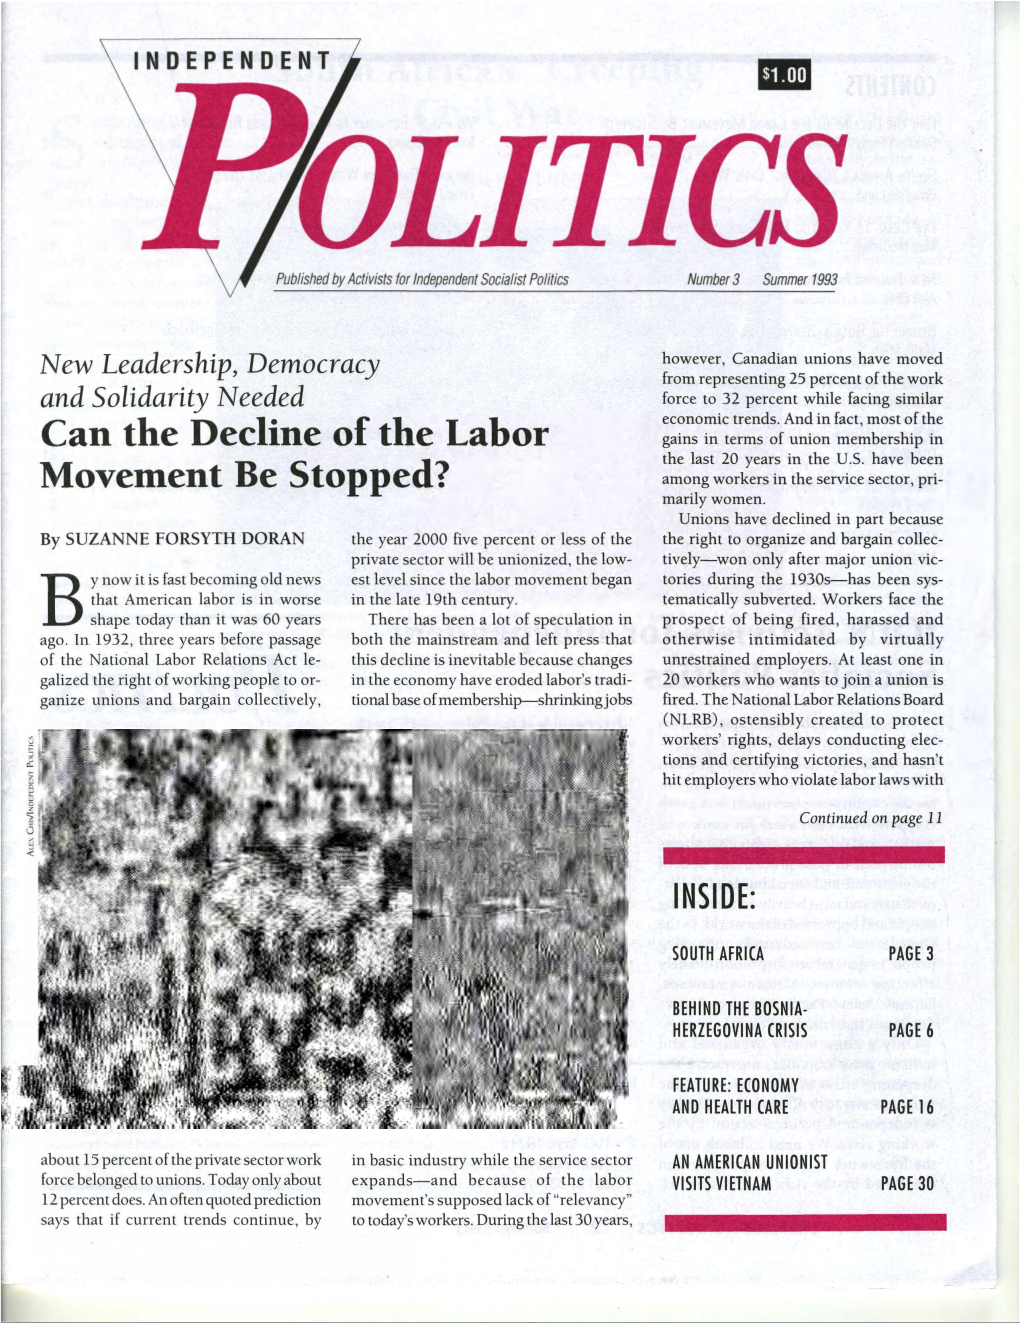 Can the Decline of the Labor Movement Be Stopped?